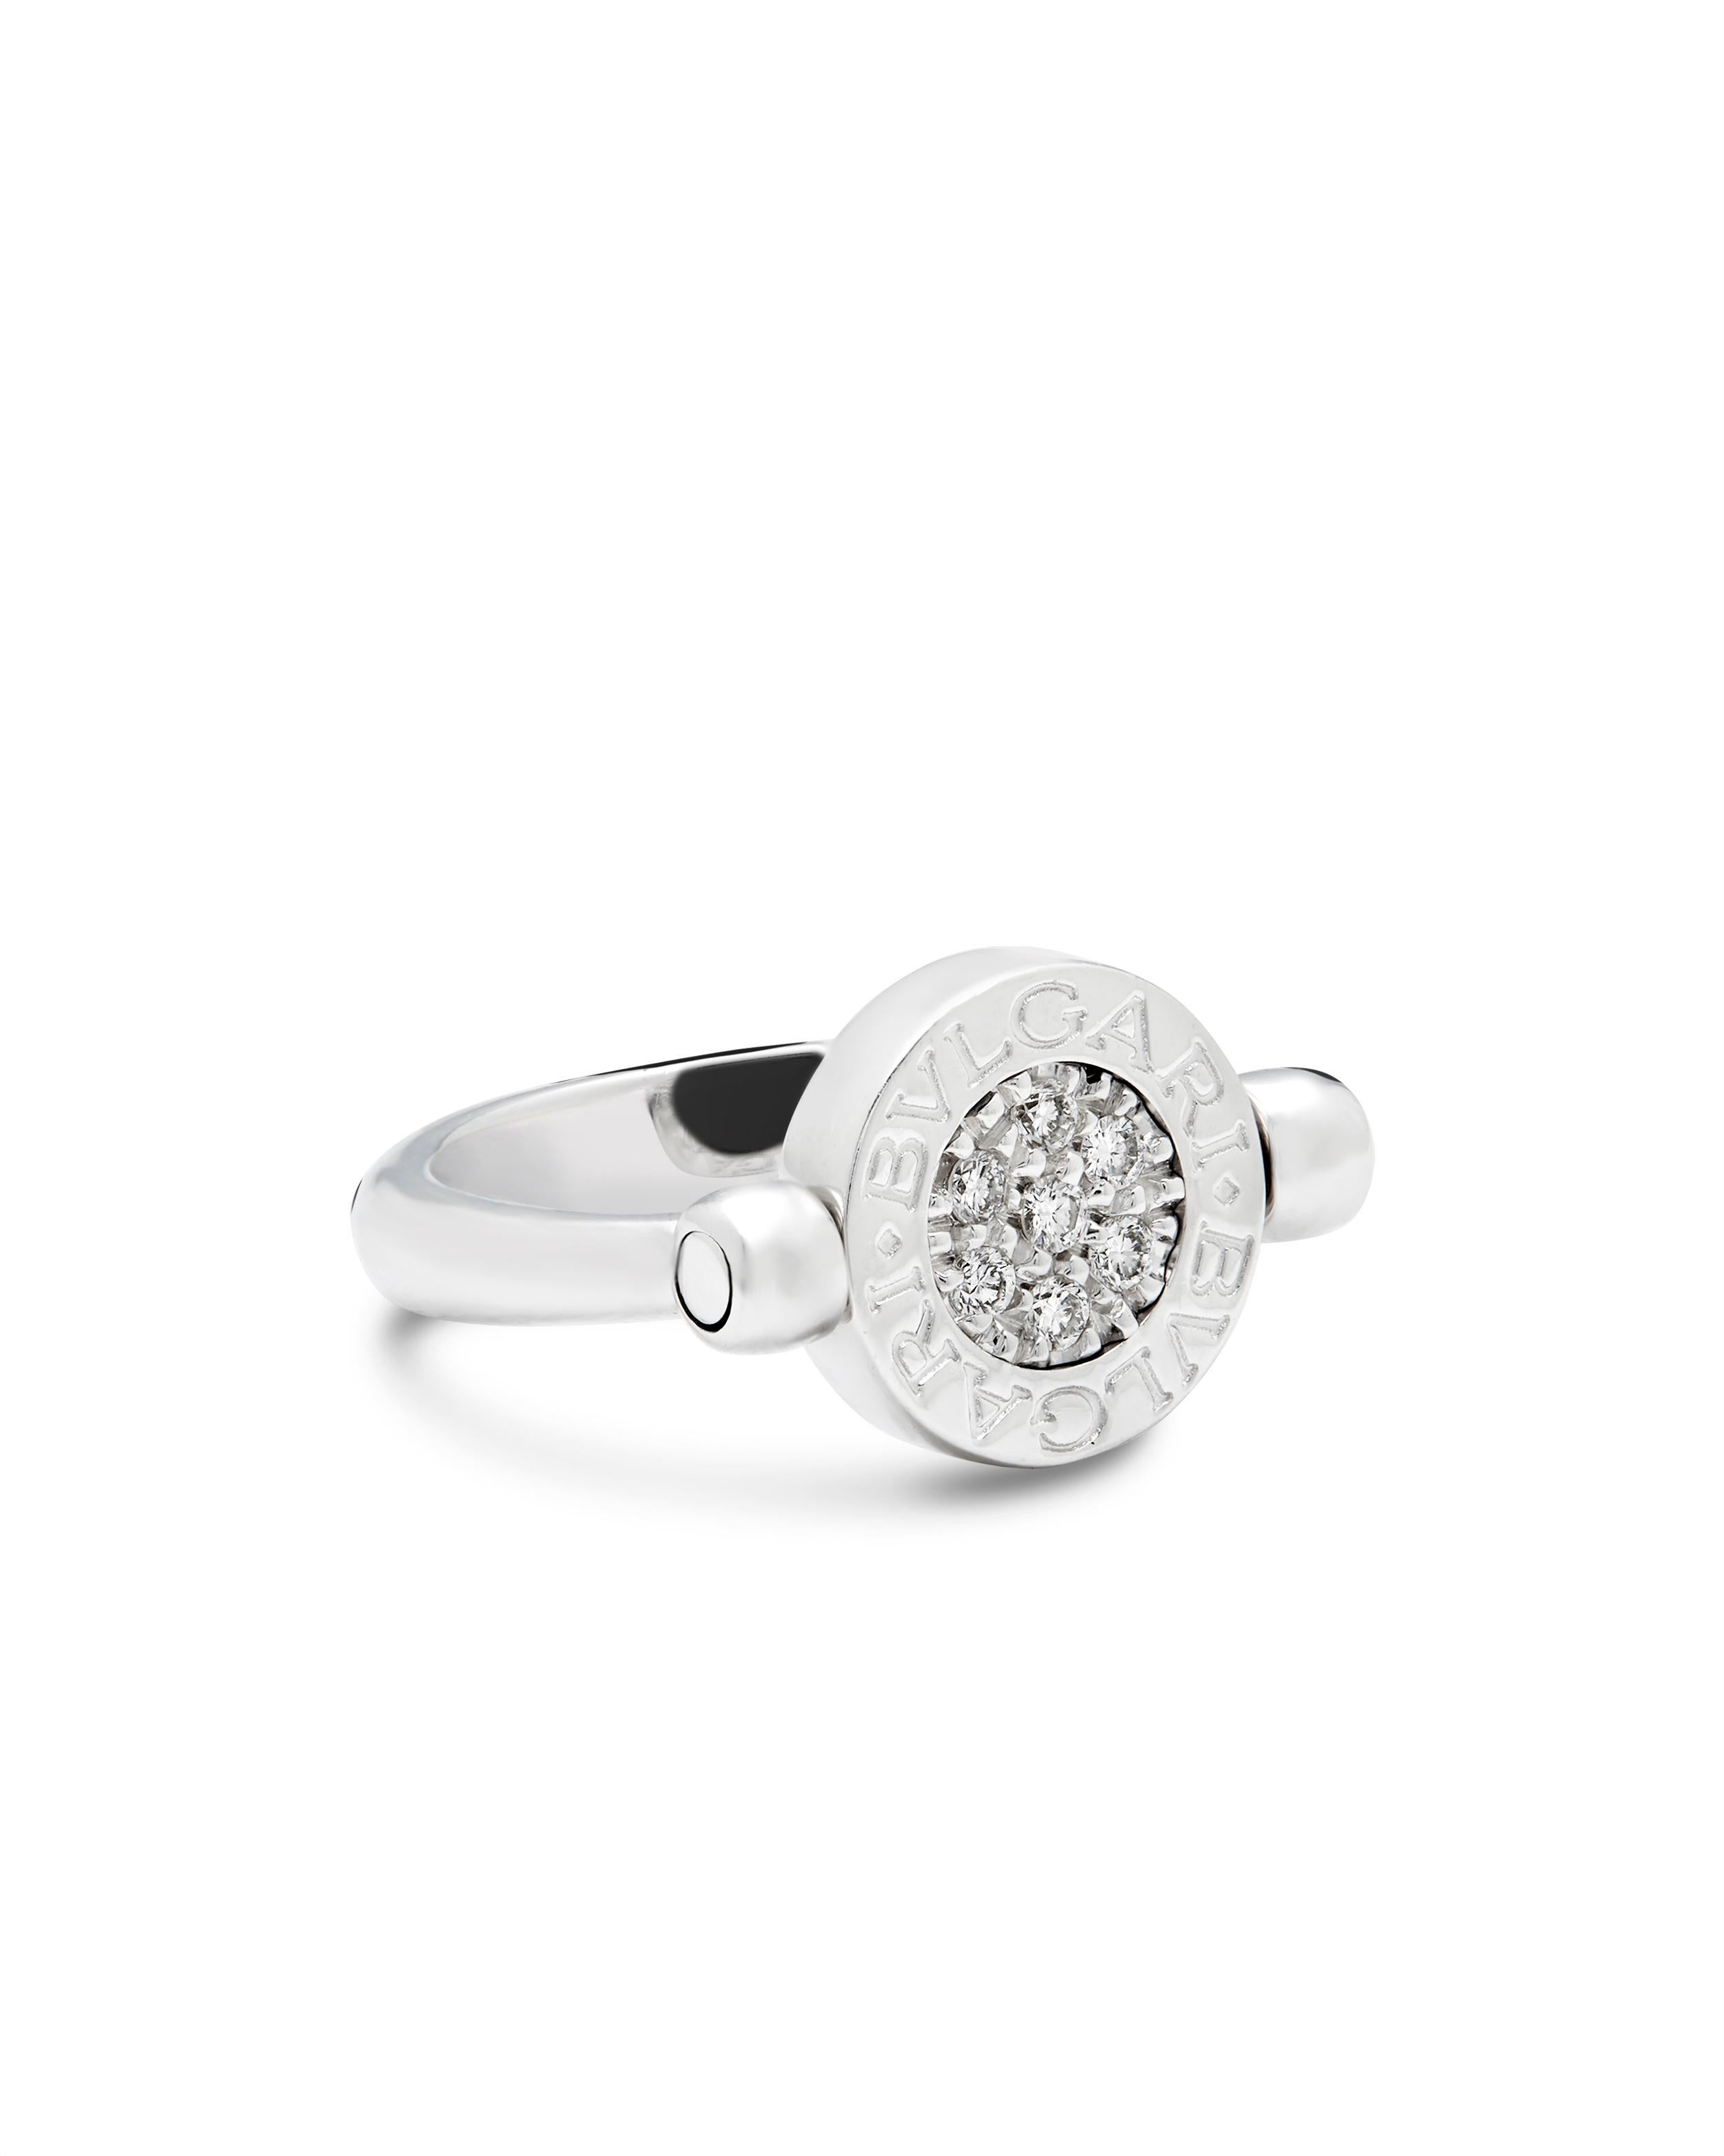 Bvlgari Bvlgari flip ring set with Onyx and Diamond 

This Bvlgari Bvlgari fun flip double sided ring was originally inspired by the edges of the Romain coin, whilst today a fun multi-wear ring, this piece can be flipped to either wear it as a